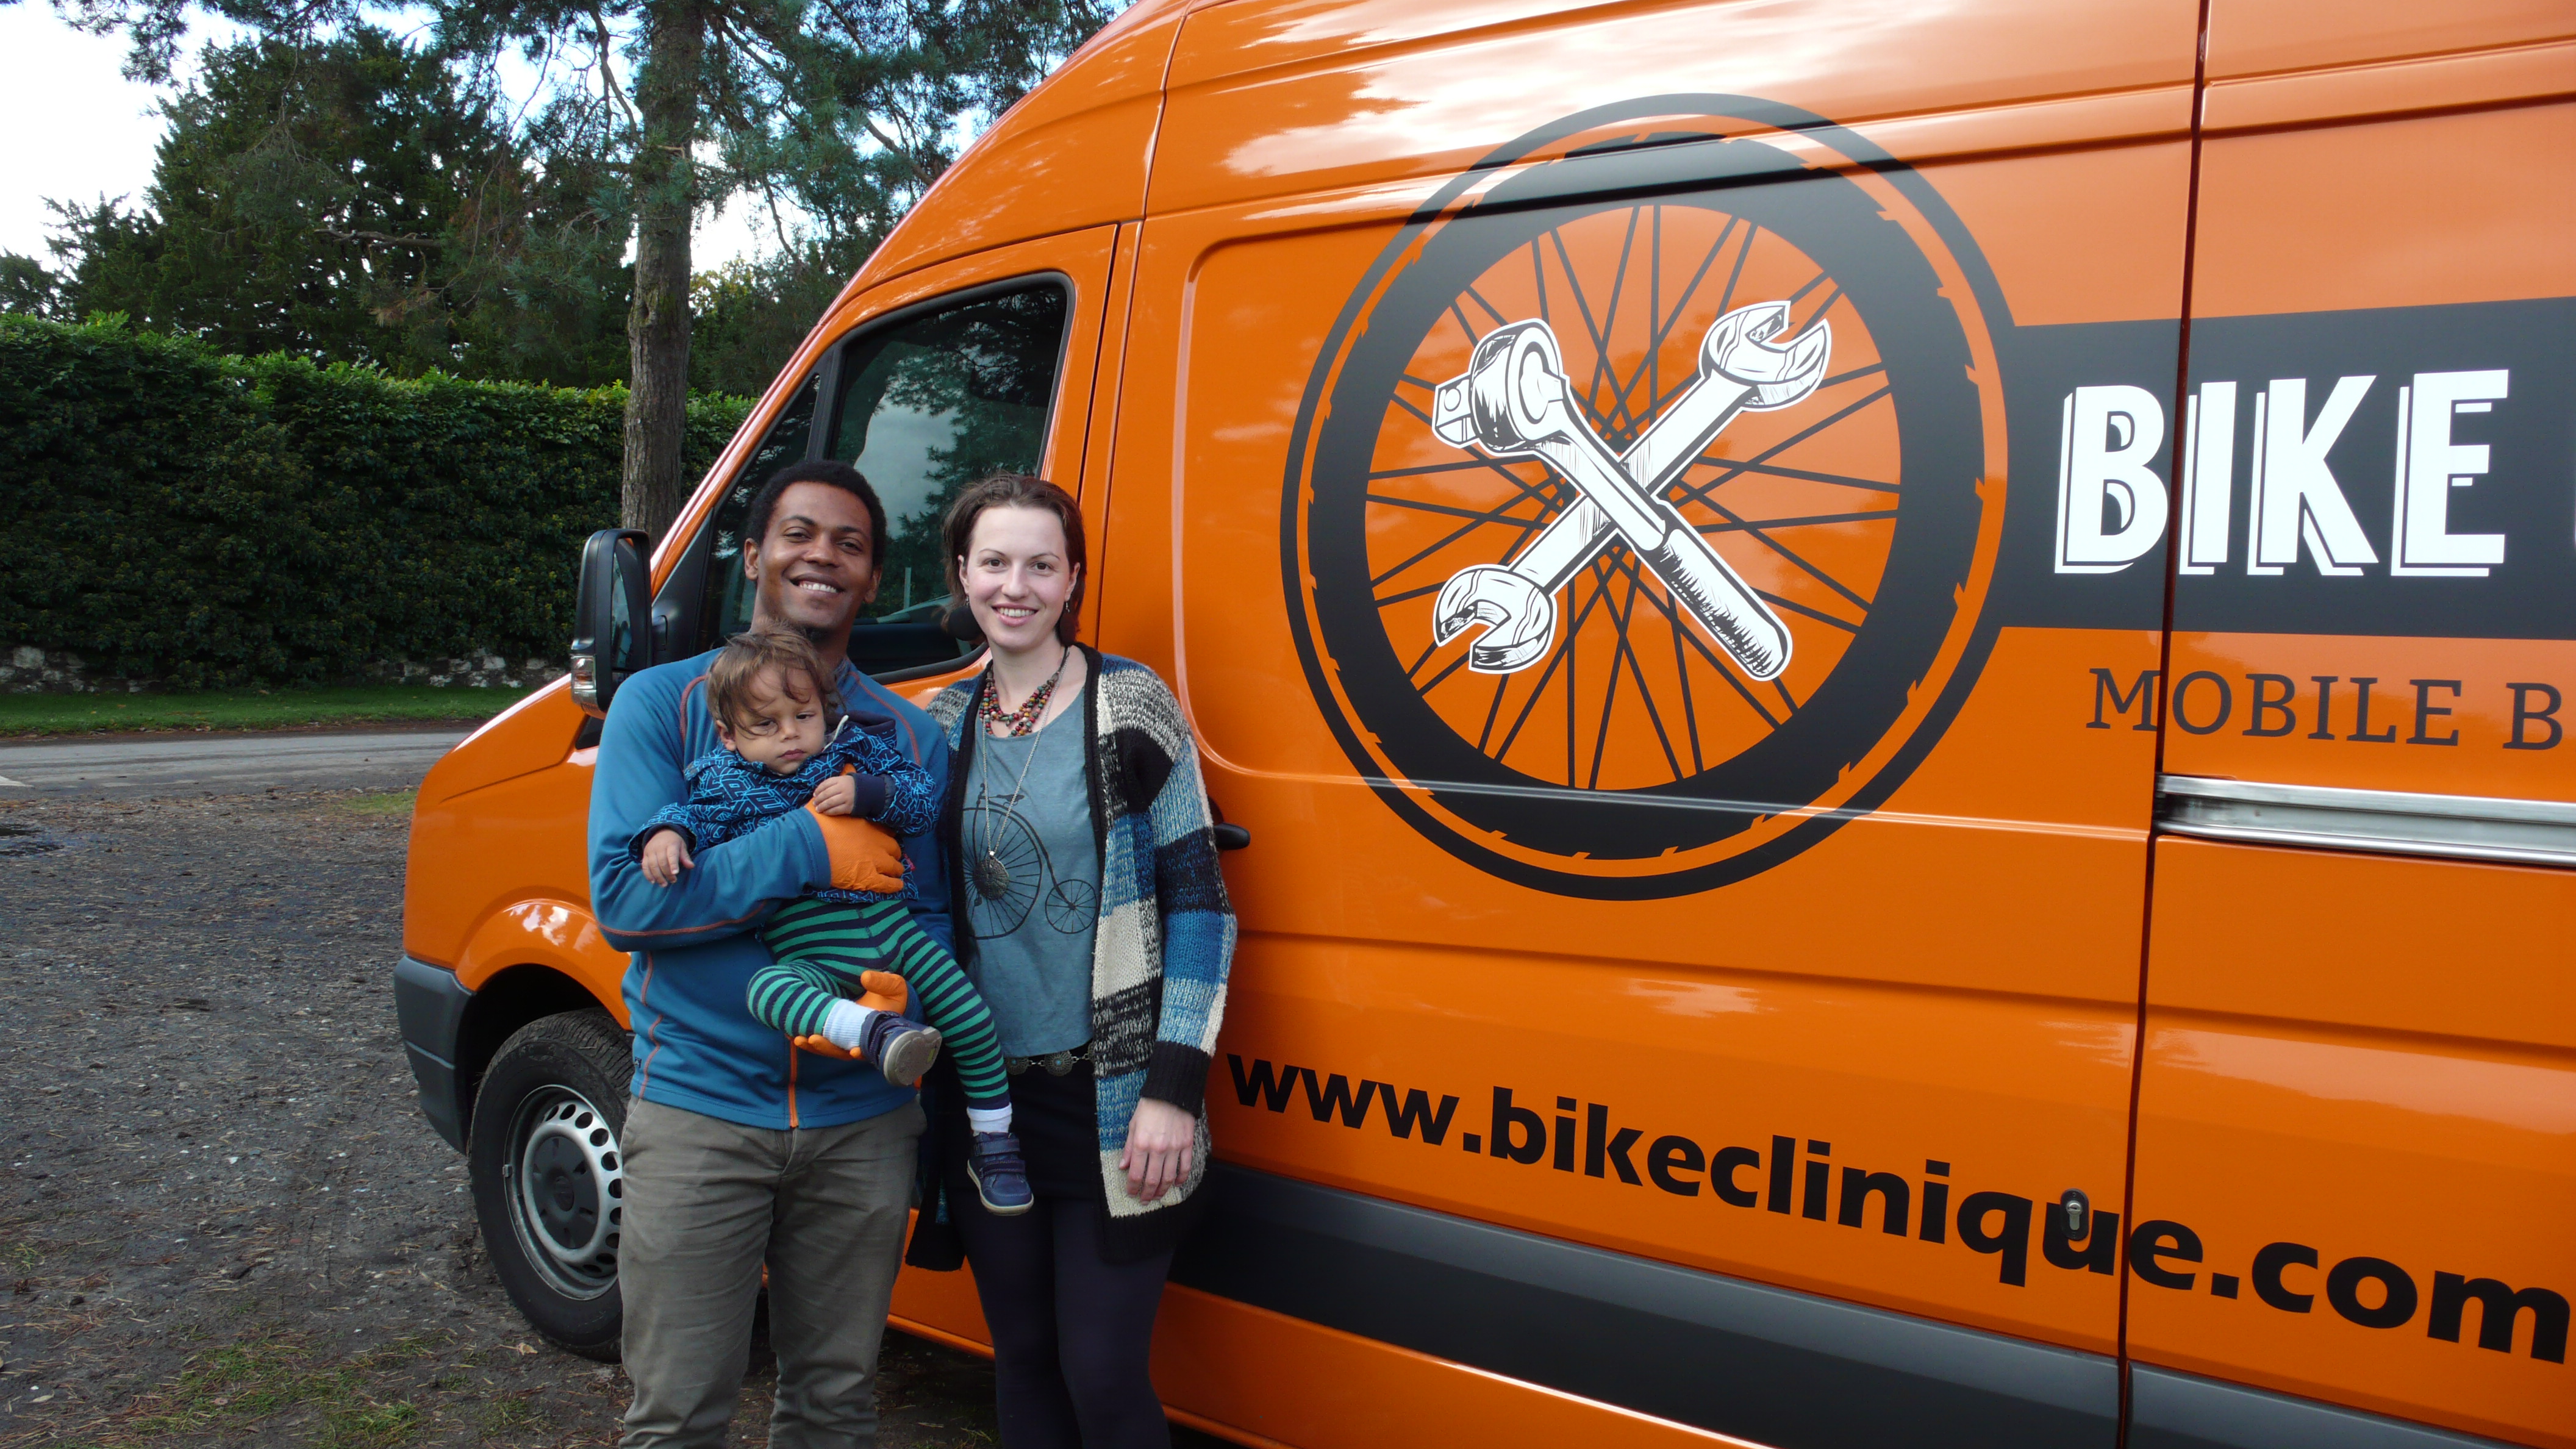 The Bike Clinique team- Family run, independent bike shop specialising in mobile bike repairs and servicing.